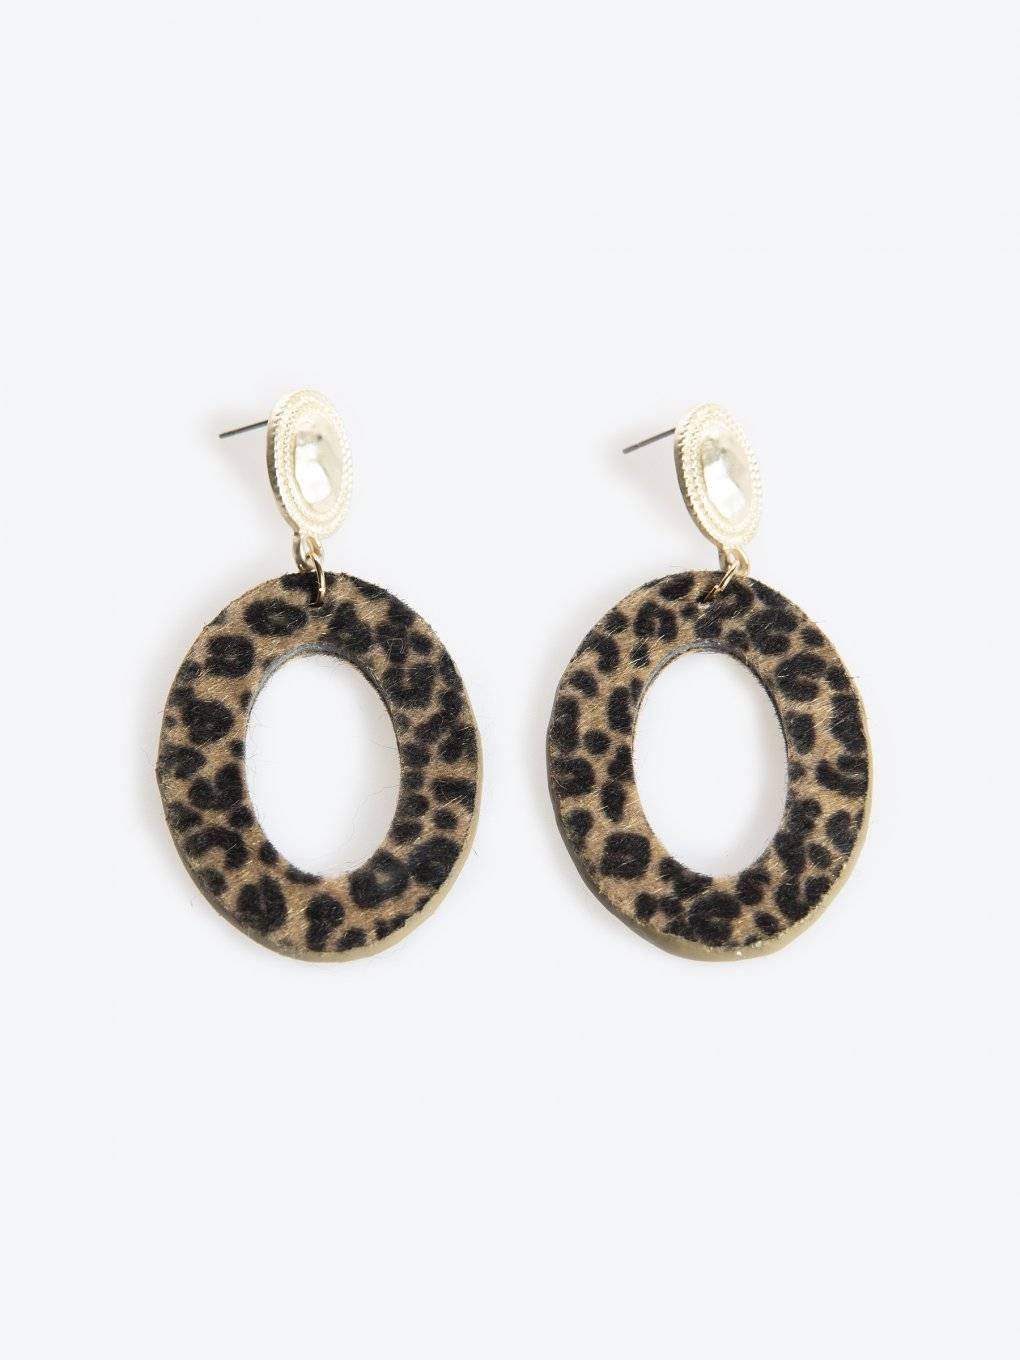 Drop earrings with animal texture